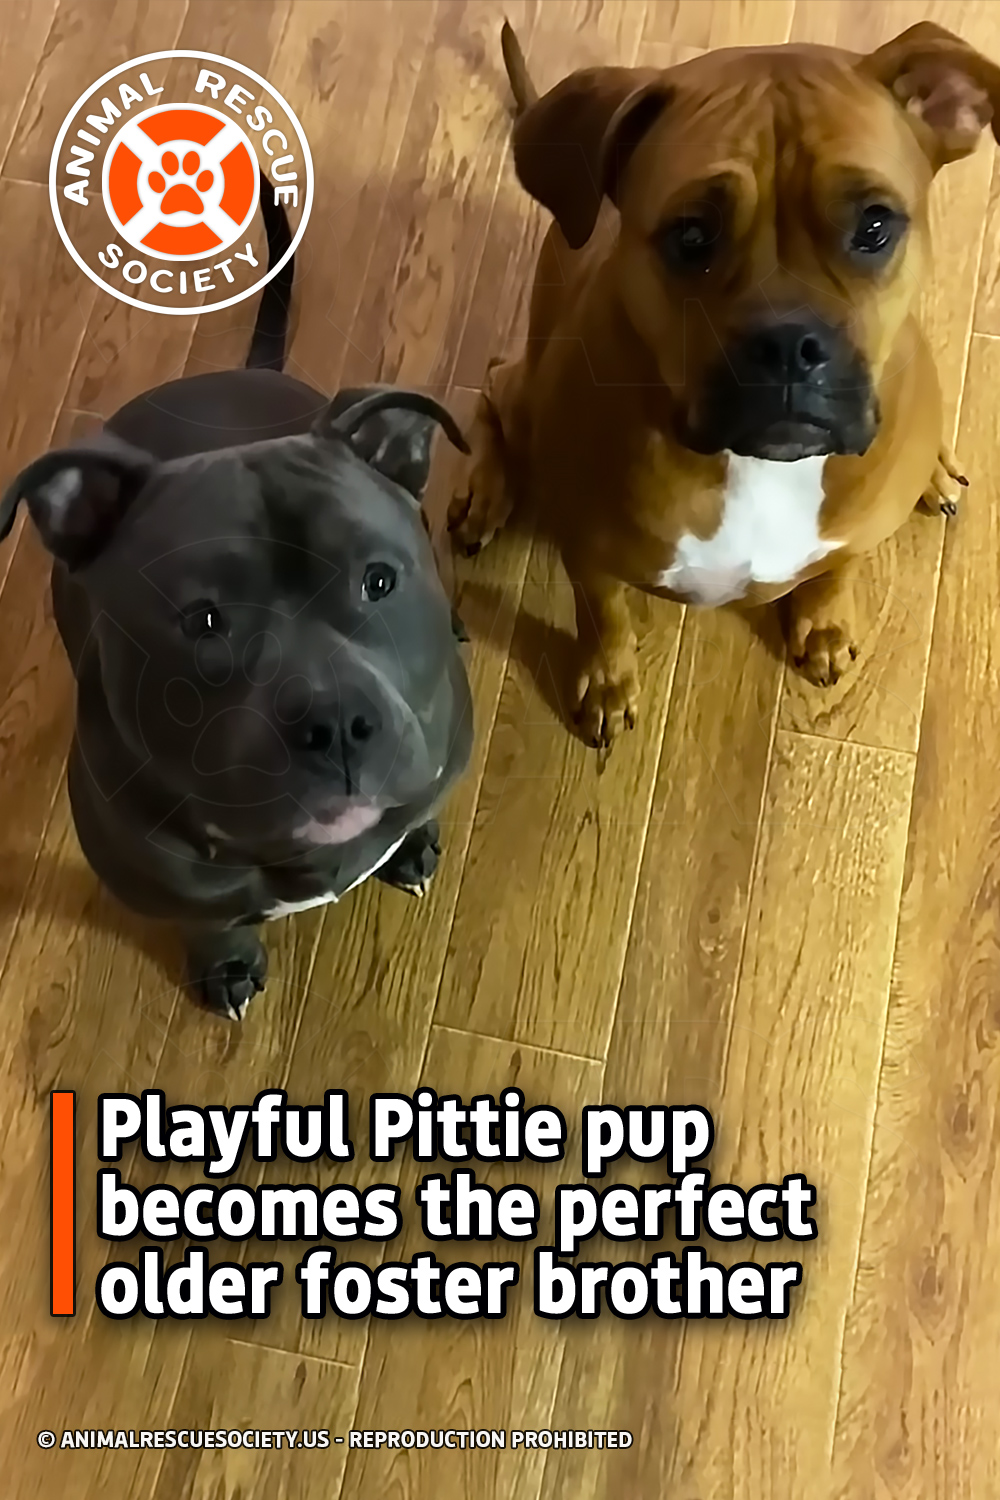 Playful Pittie pup becomes the perfect older foster brother